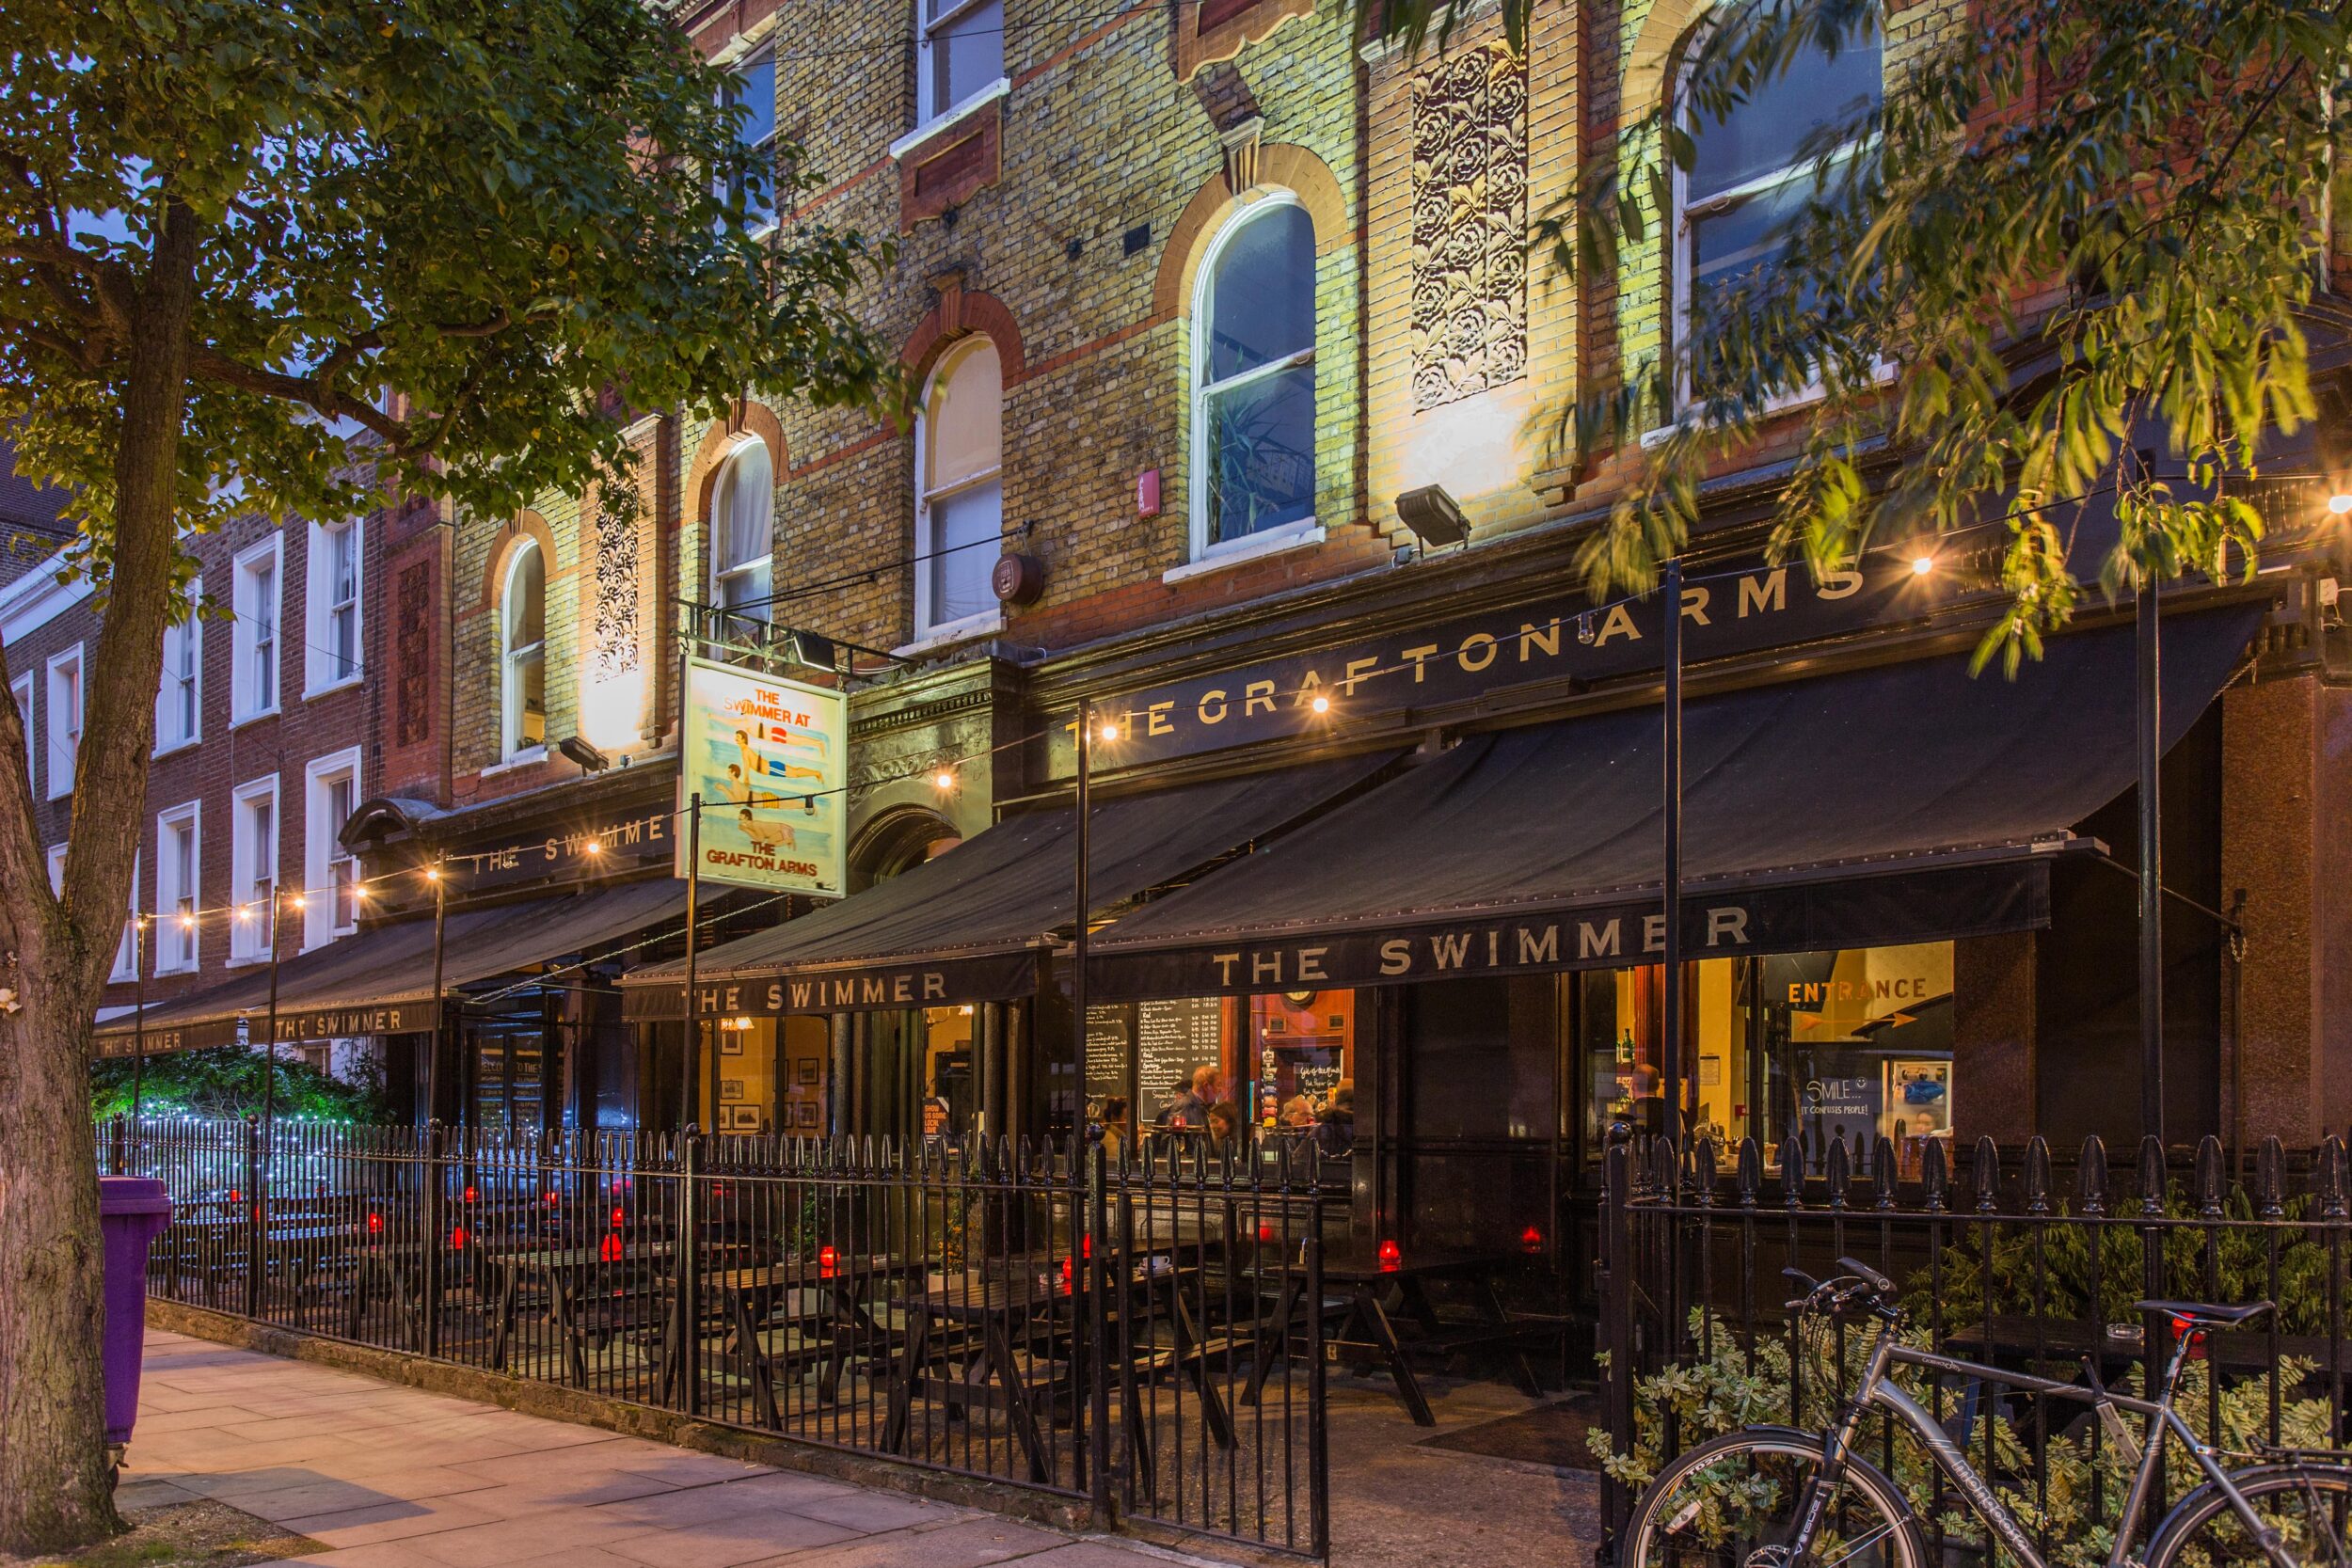 A photograph of the exterior of a pub owned by Remarkable Pubs- beautiful soft lighting, and outside seating. Graphic design produced by Barefaced Studios, design agency based in Islington, North London.